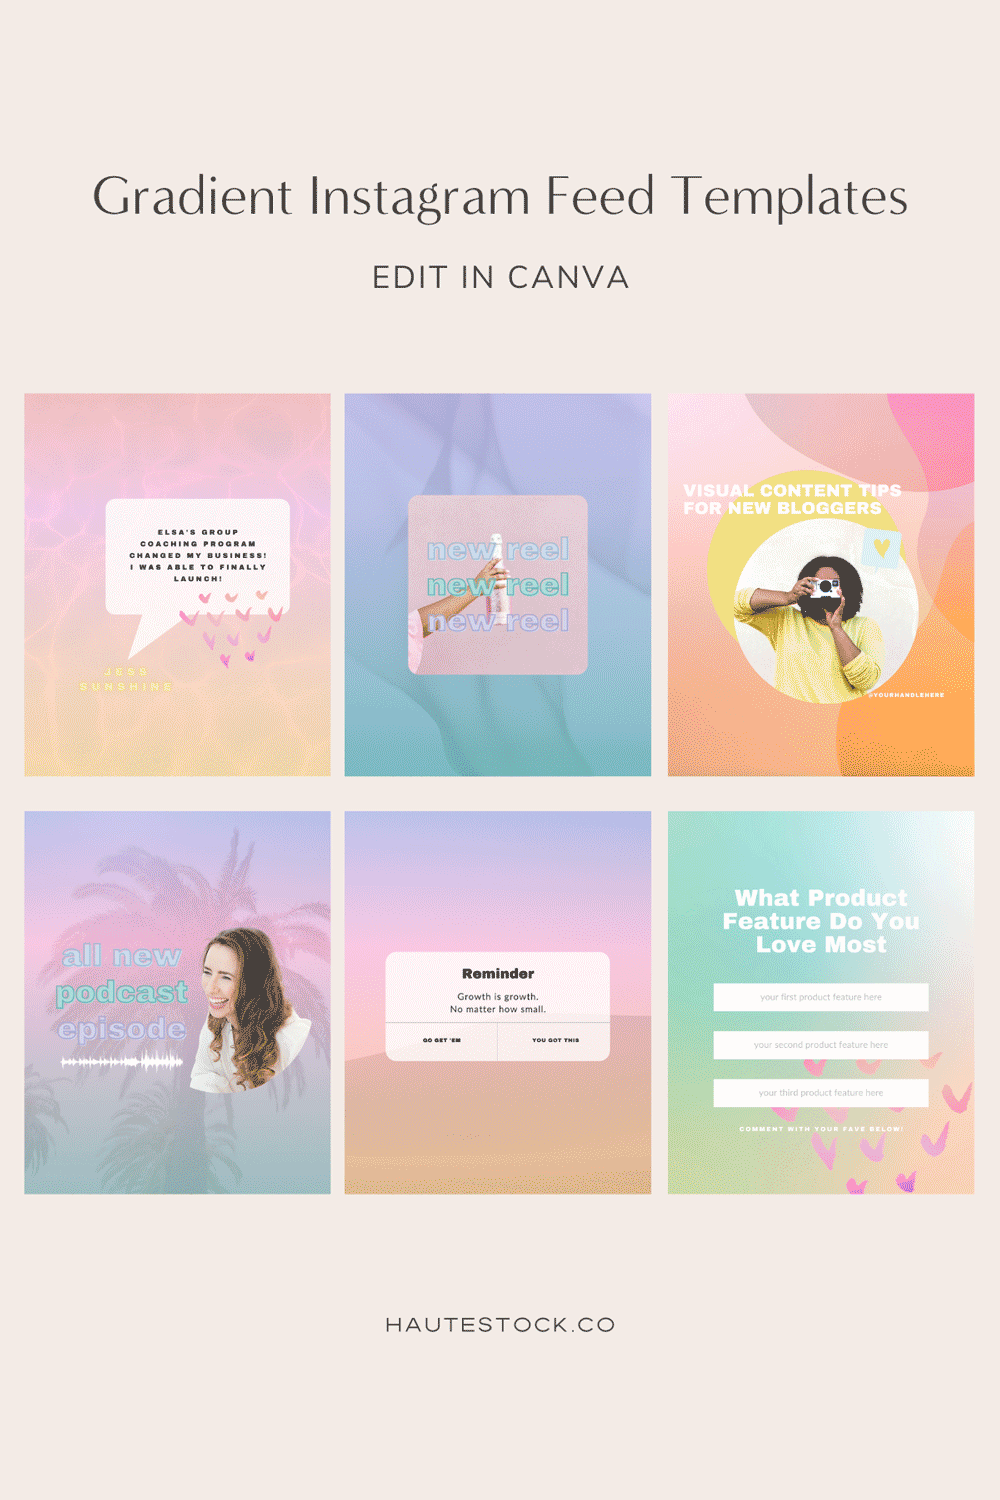 Pastel gradient social media graphics to edit in Canva. Create beautiful, eye-catching and trendy Instagram posts, Reels covers, and graphics with these editable Canva templates from Haute Stock!